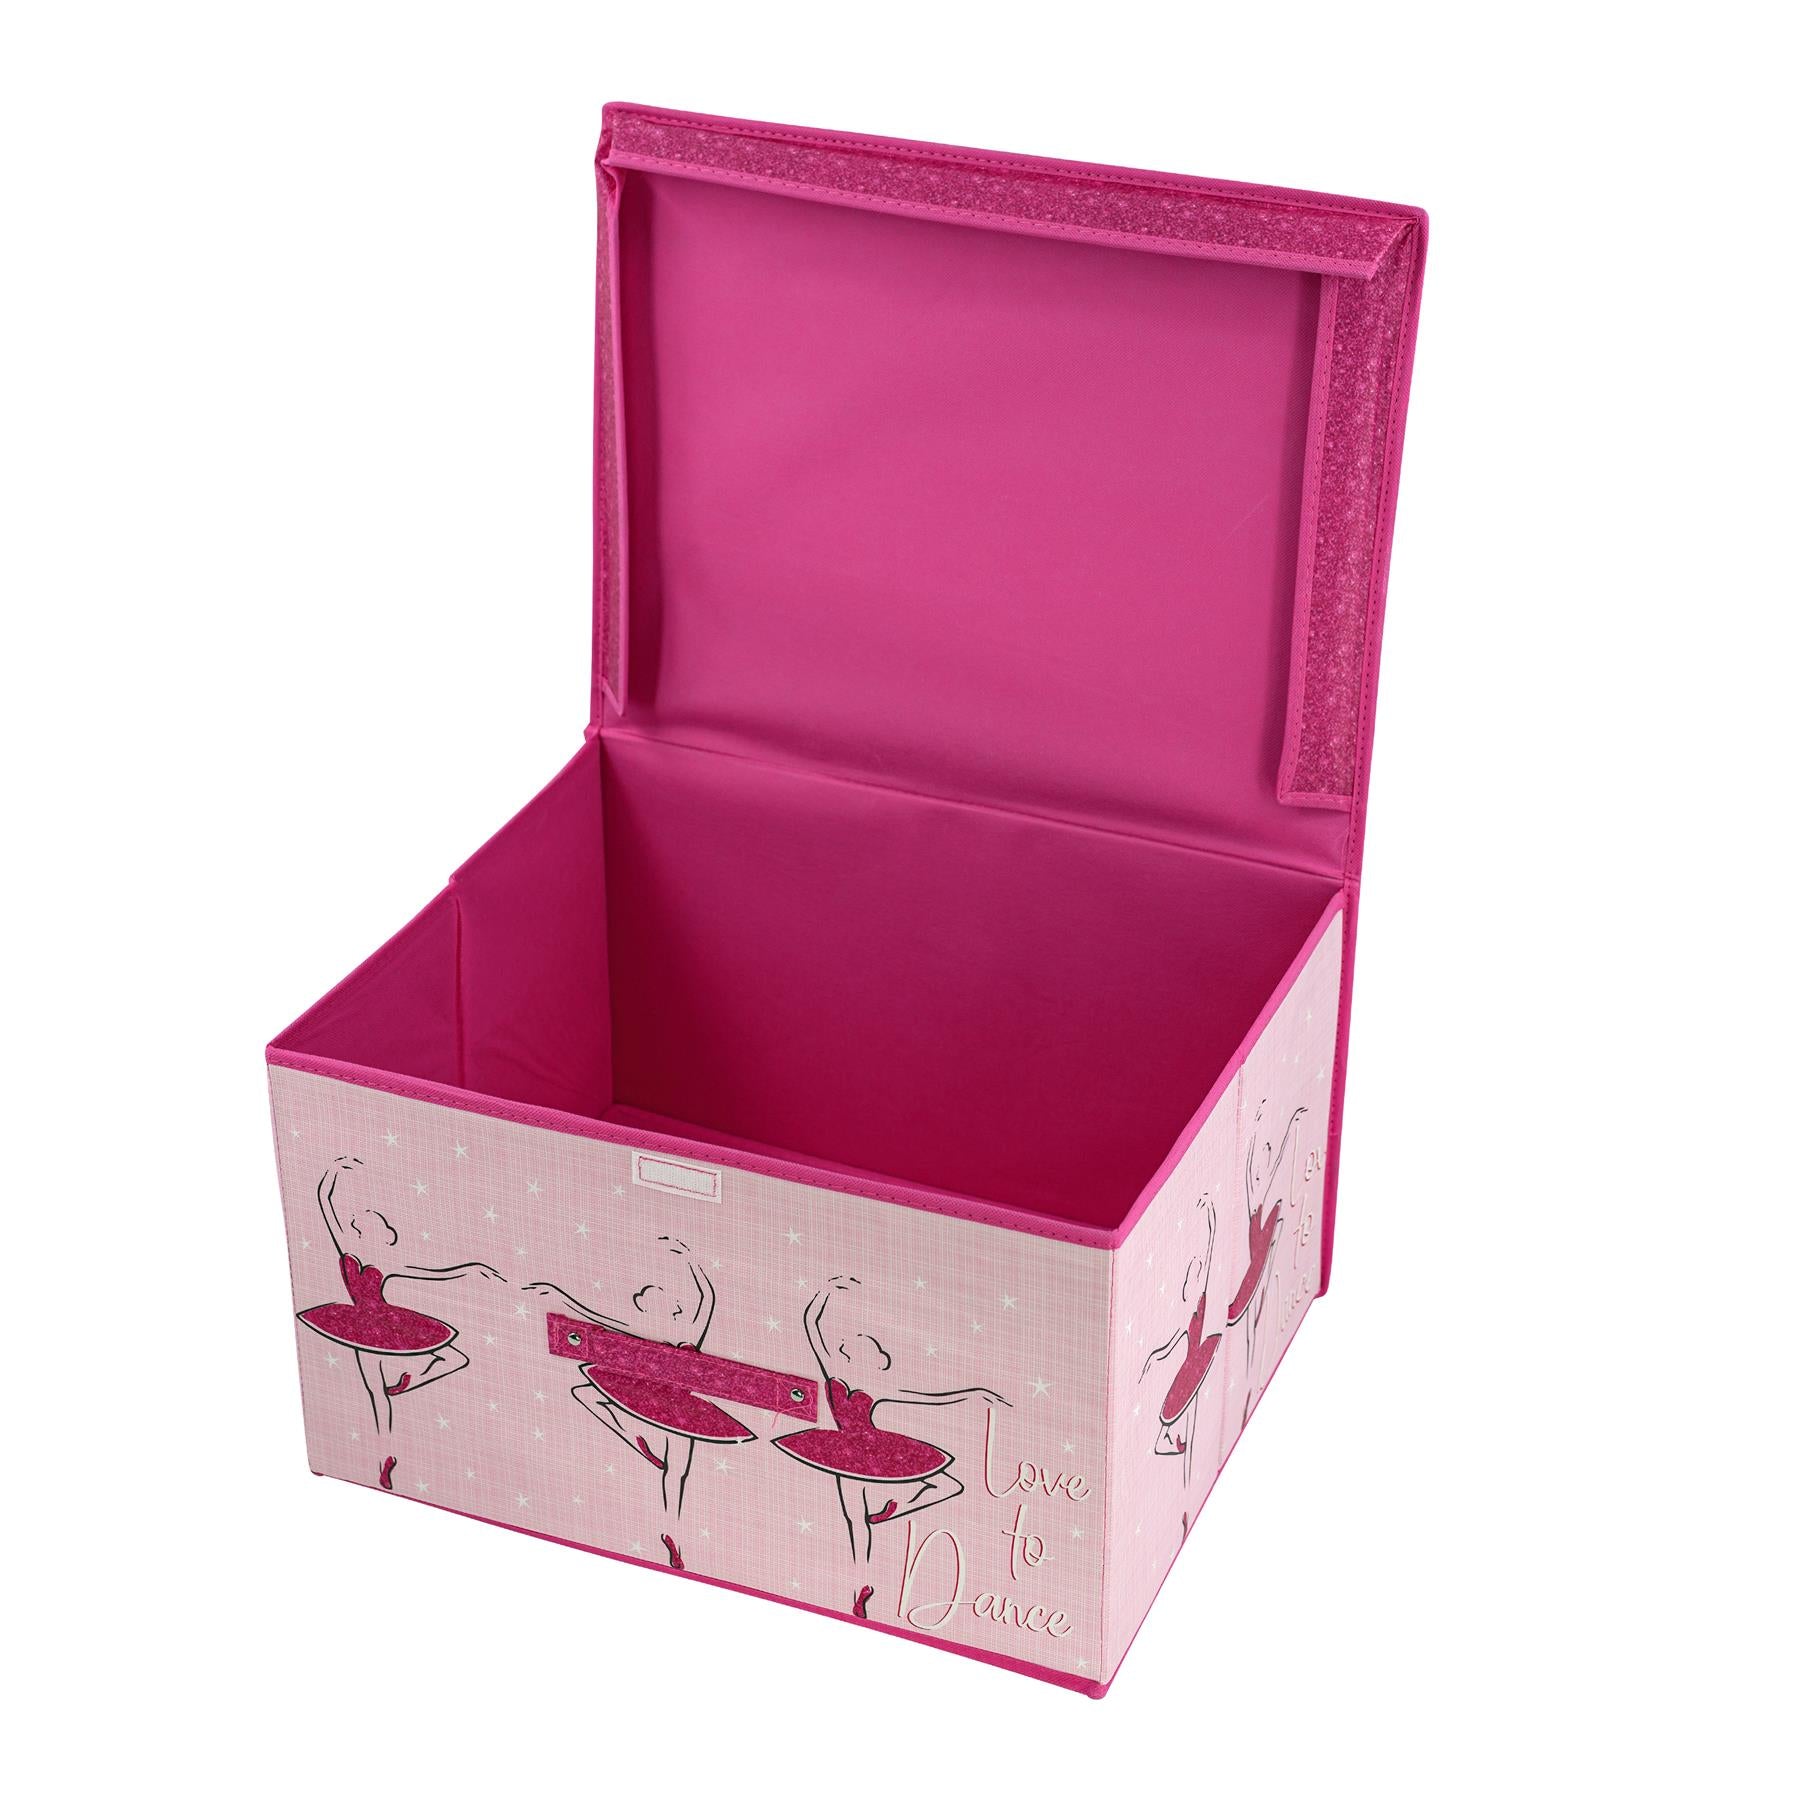 Ballerina Storage Box by The Magic Toy Shop - The Magic Toy Shop